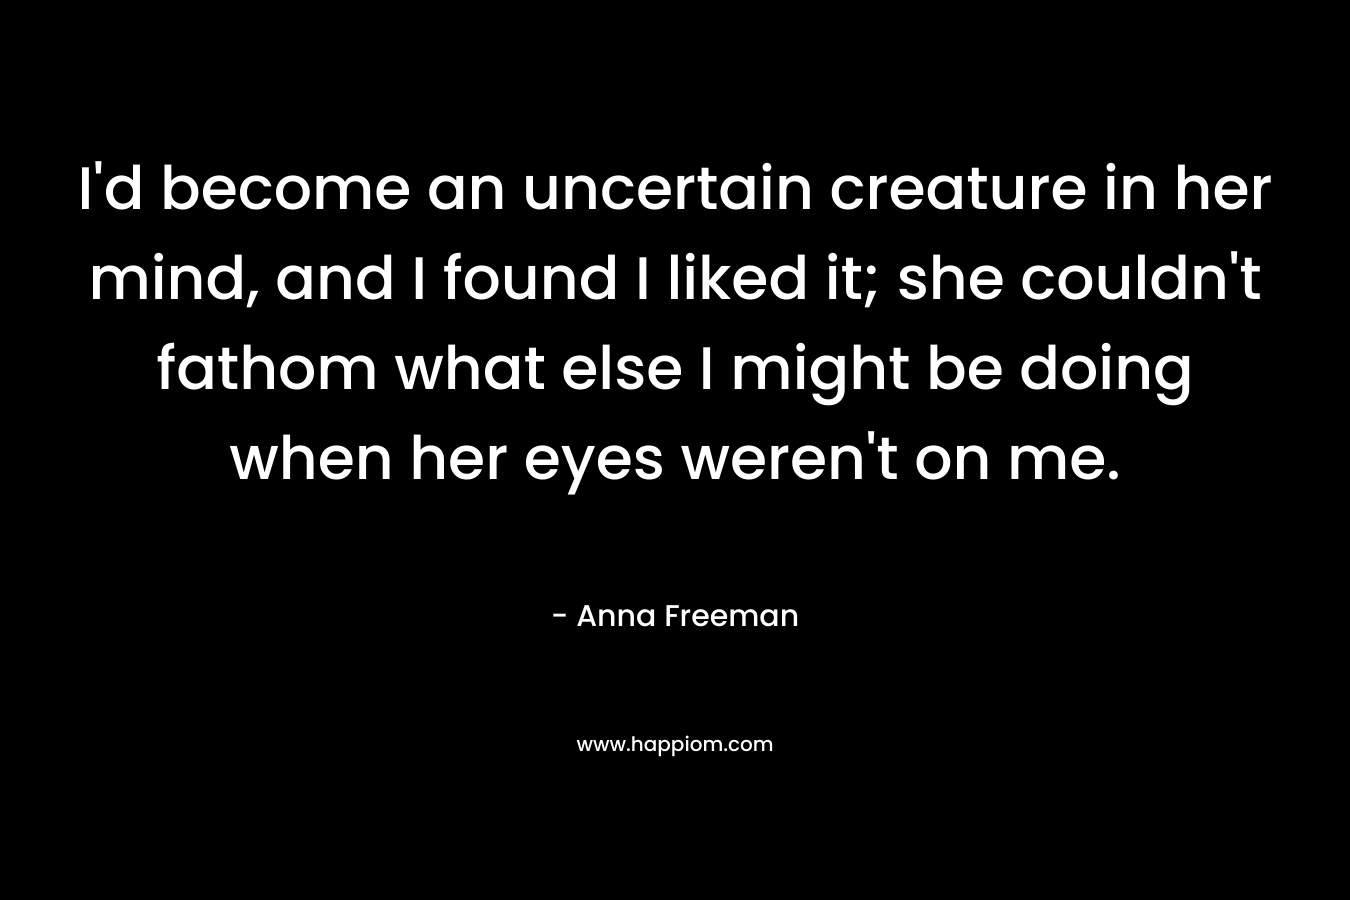 I’d become an uncertain creature in her mind, and I found I liked it; she couldn’t fathom what else I might be doing when her eyes weren’t on me. – Anna Freeman